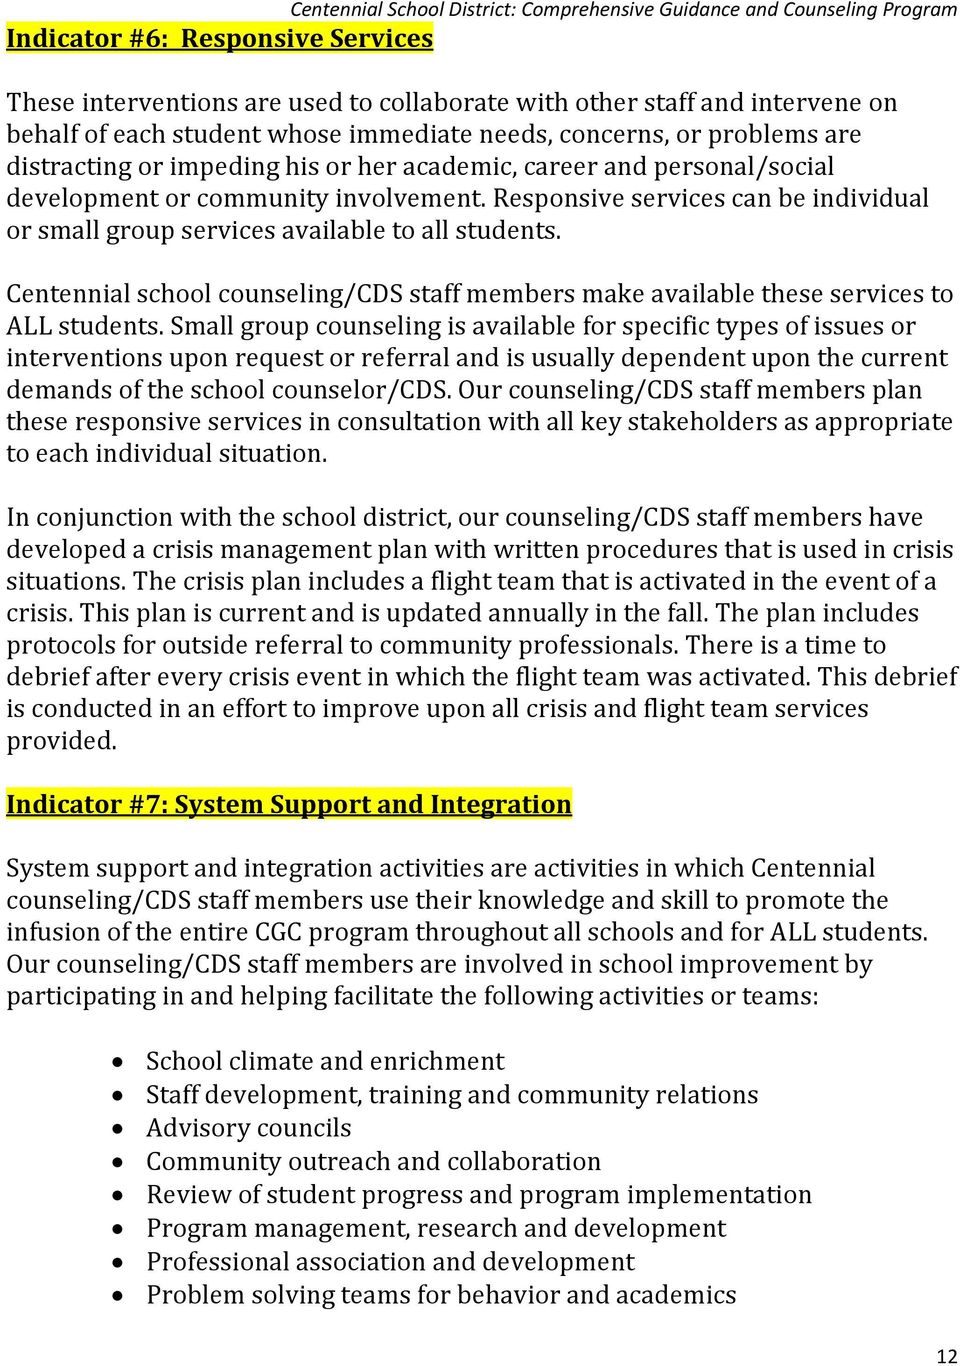 Responsive services can be individual or small group services available to all students. Centennial school counseling/cds staff members make available these services to ALL students.